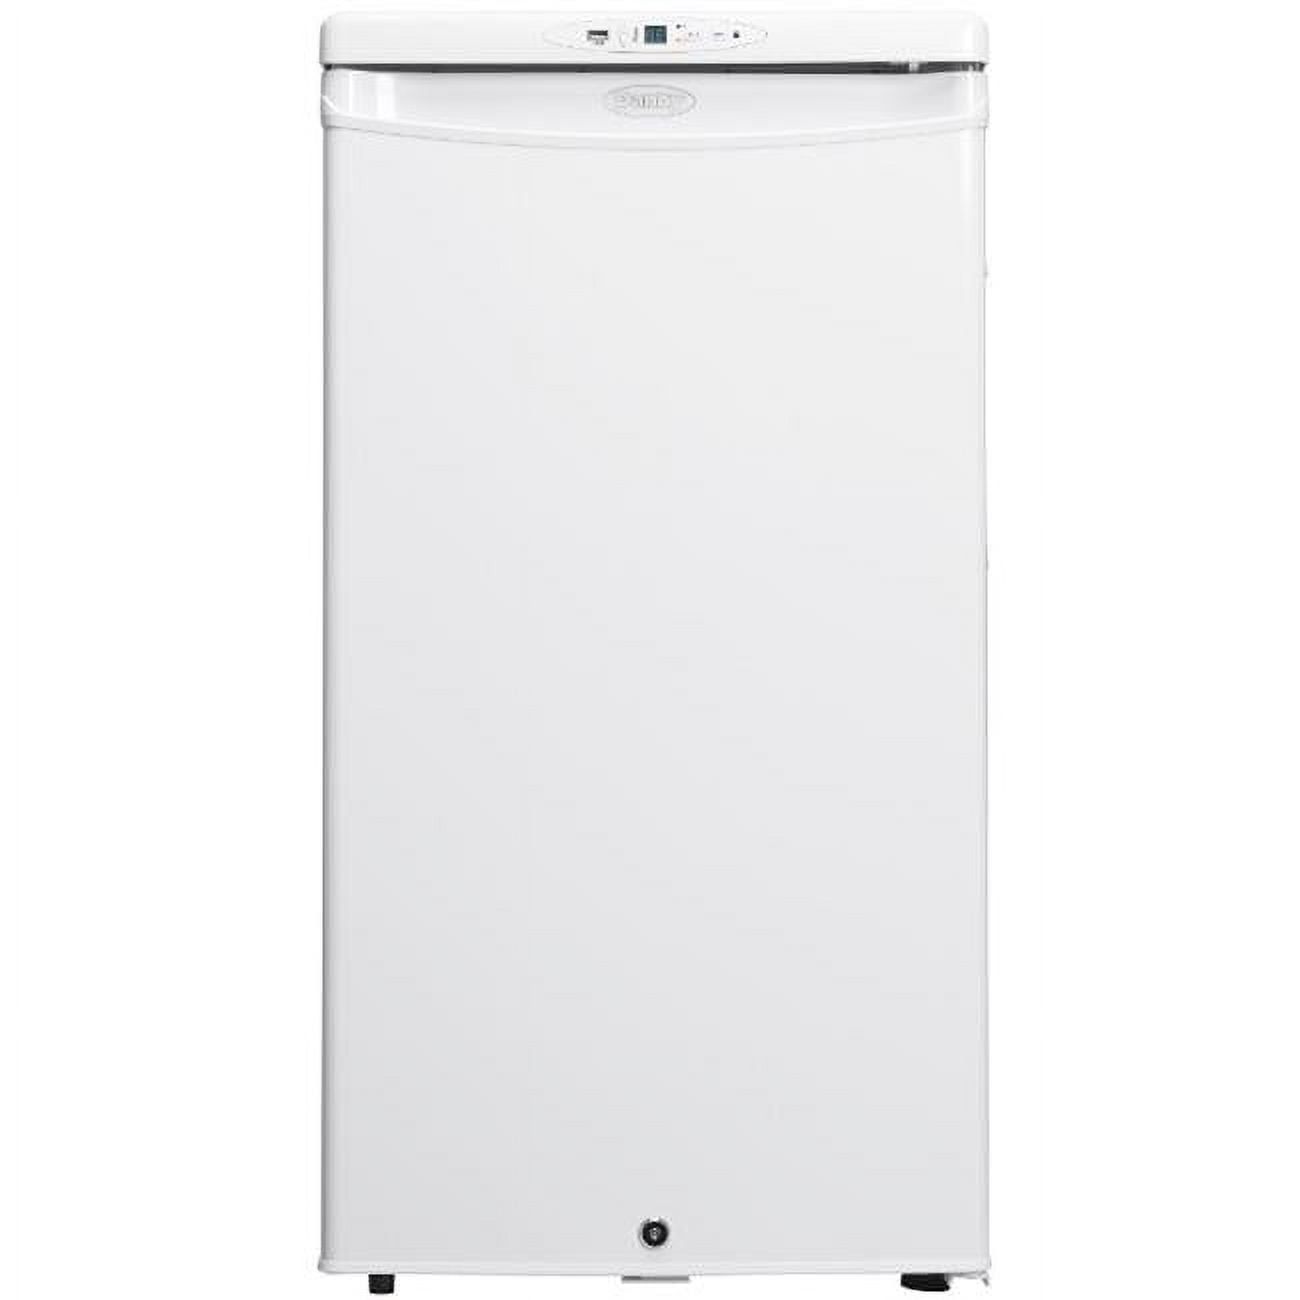 919353-5 Danby Compact Refrigerator with Freezer Section, Residential,  White, 17 11/16 Overall Width